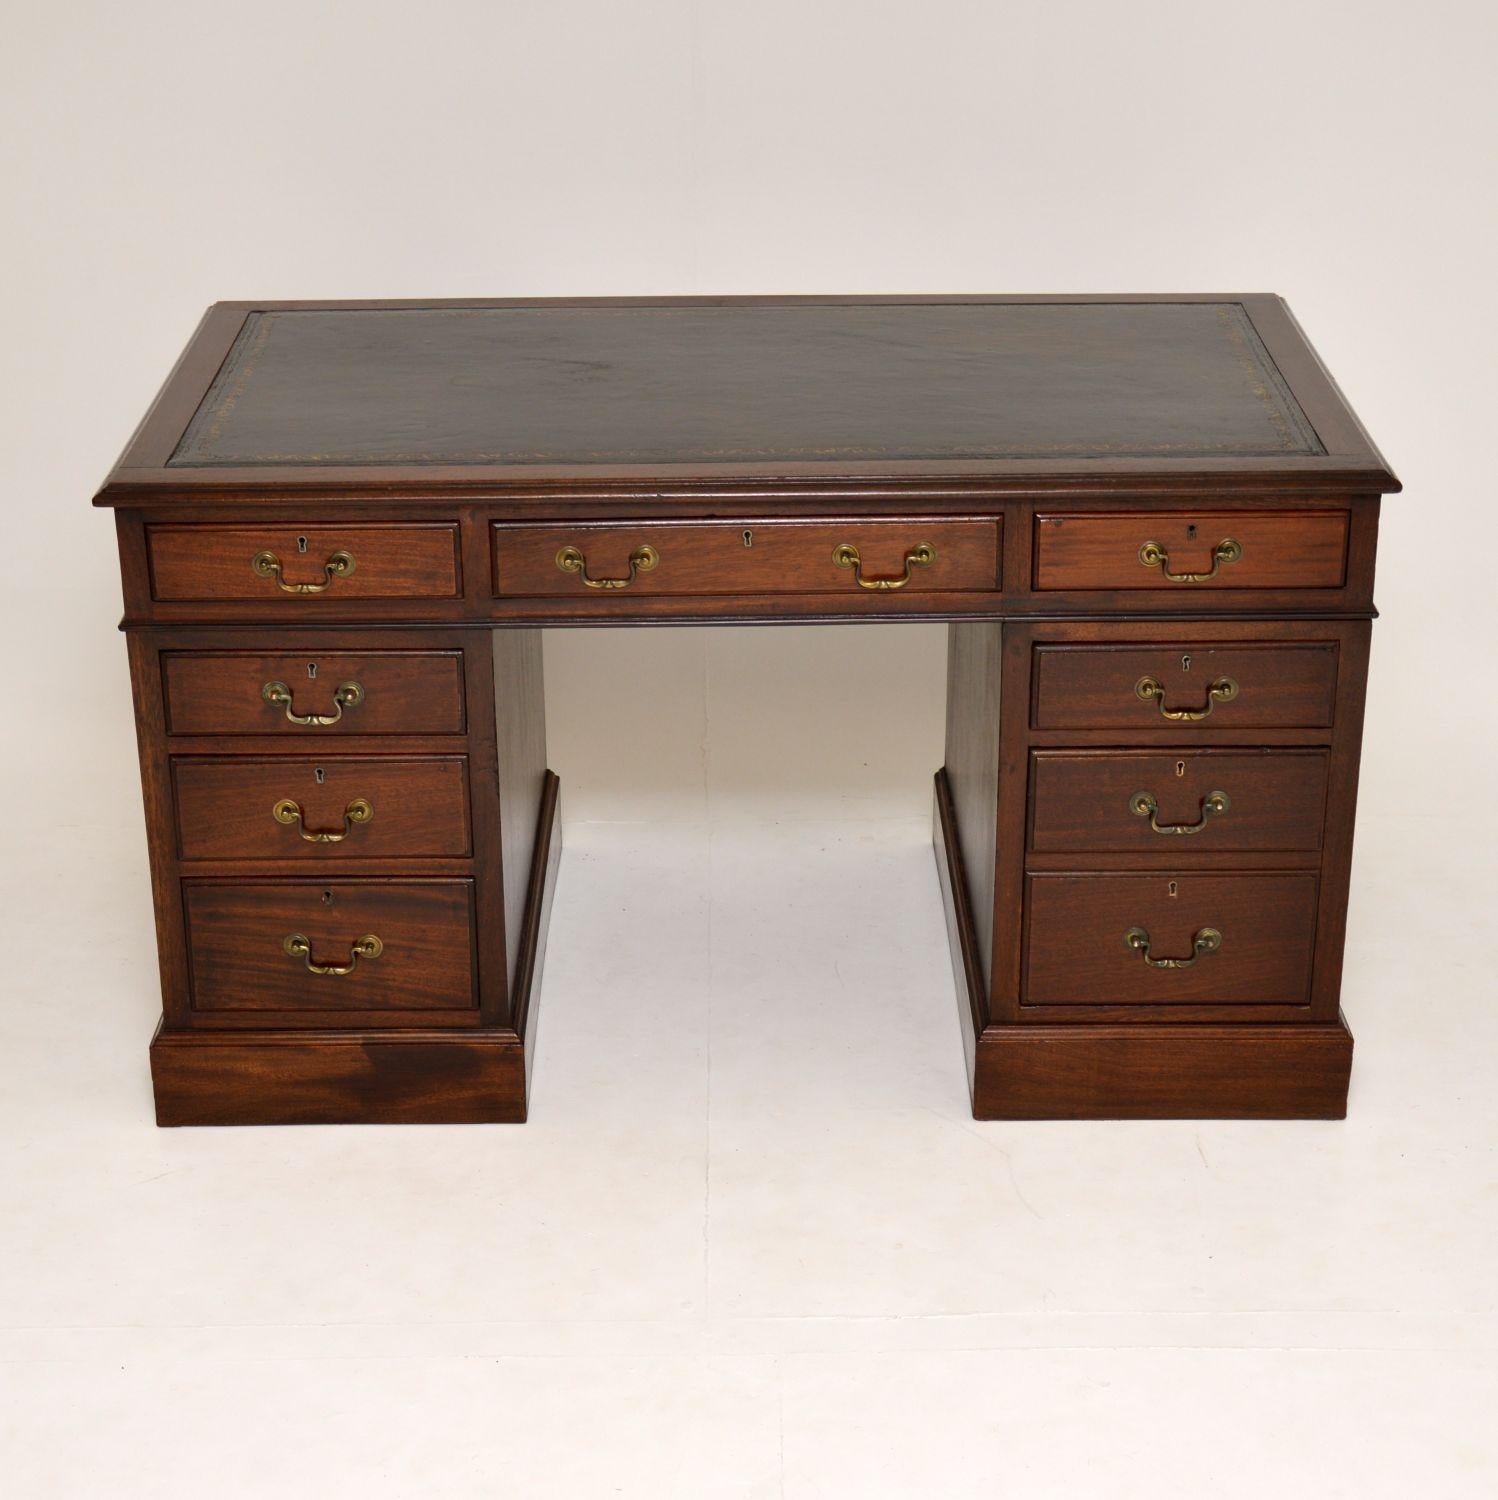 This antique pedestal desk is really good quality and is solid mahogany, with a finished polished back. It’s in excellent condition and I would date it to circa 1910 period. It lifts apart into three sections for easy transportation. The bottom